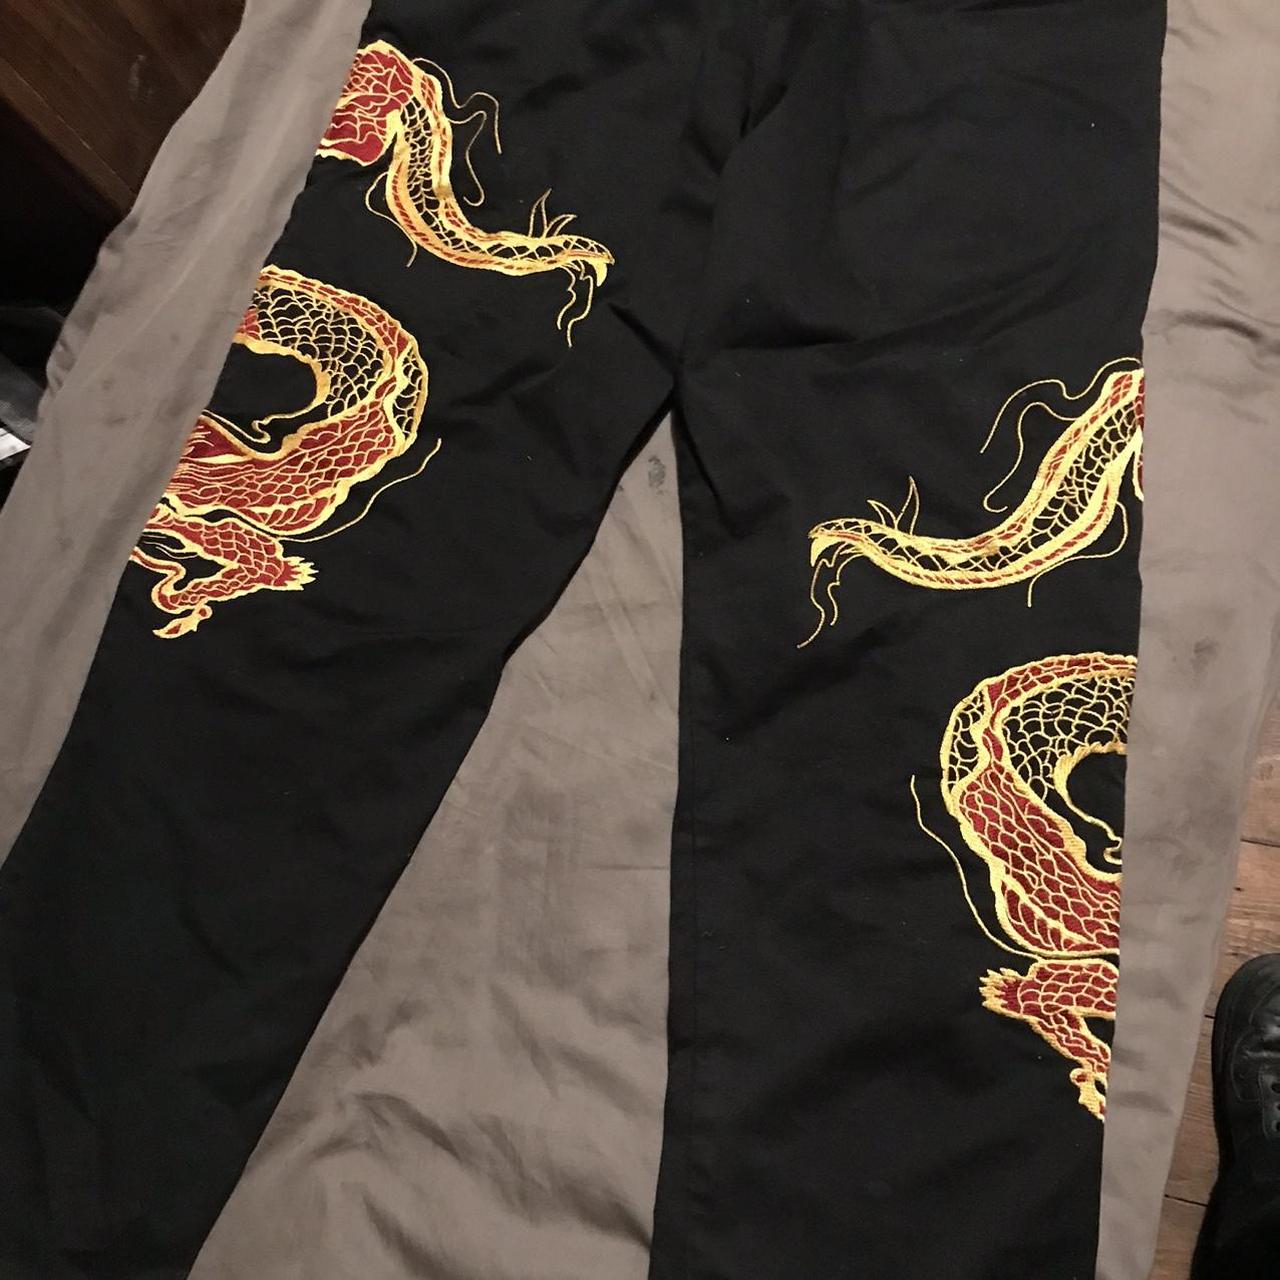 Supreme dragon work pants / trousers /bottoms, In